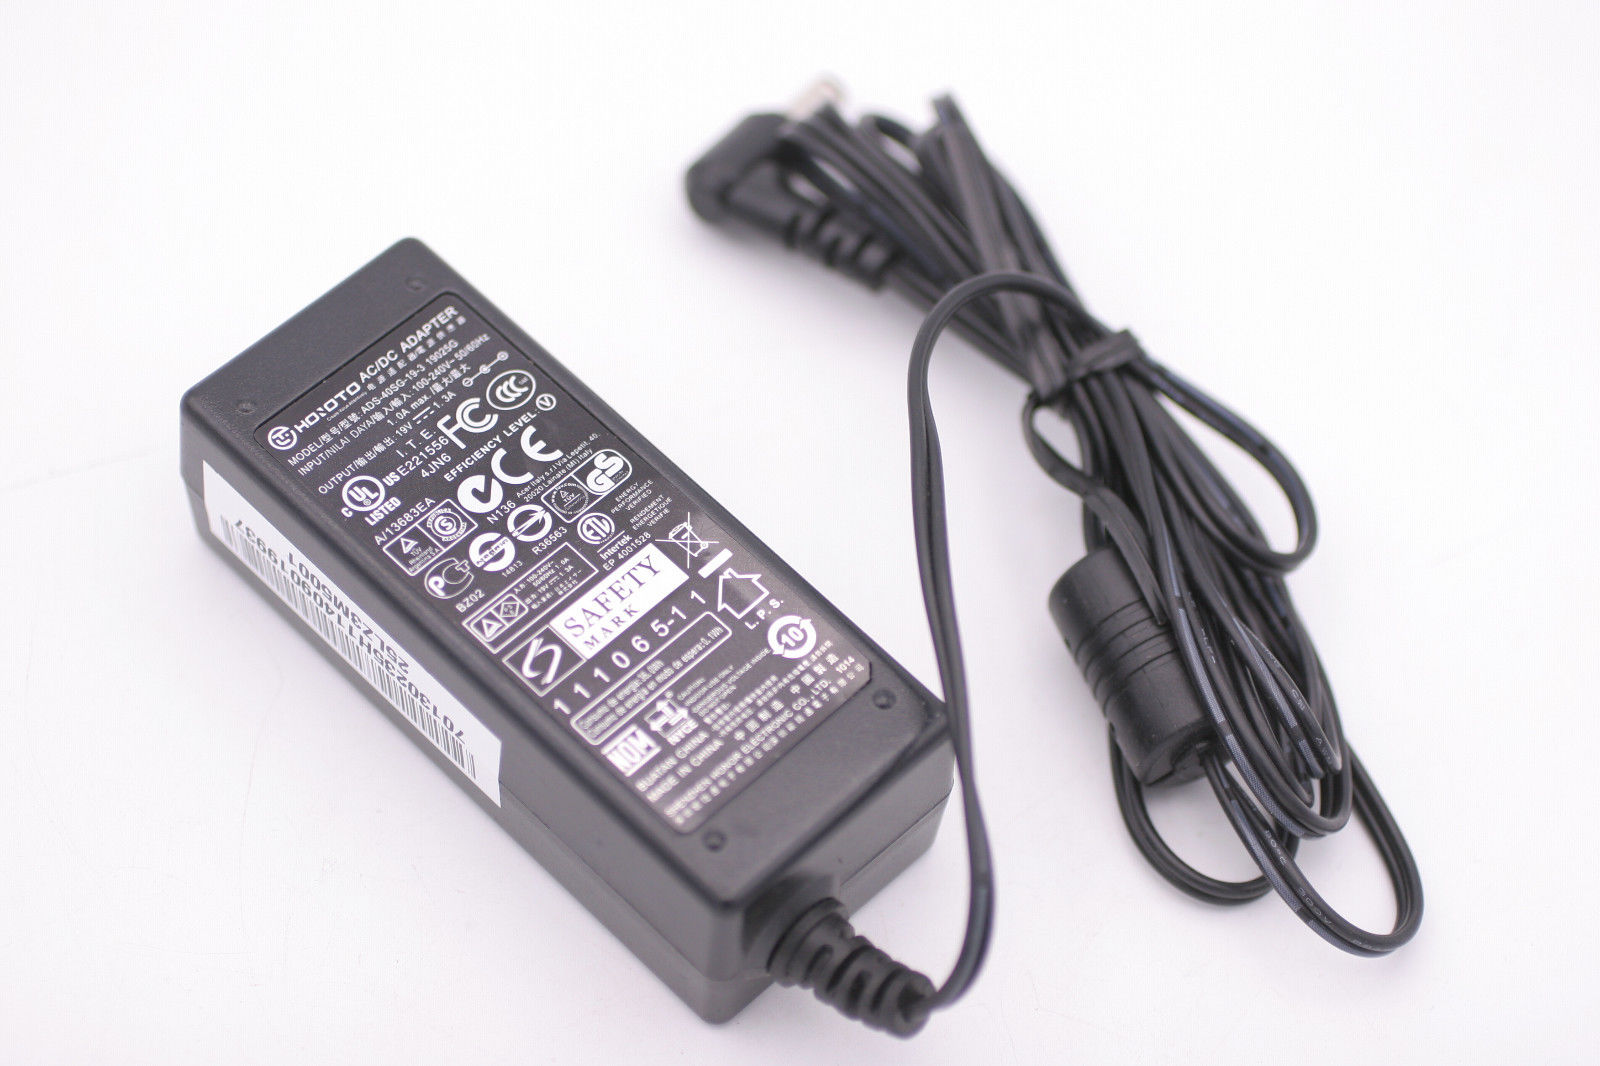 NEW 19V 1.3A HOIOTO ADS-40SG-19-3 19025G EAY6254949201 AC Adapter